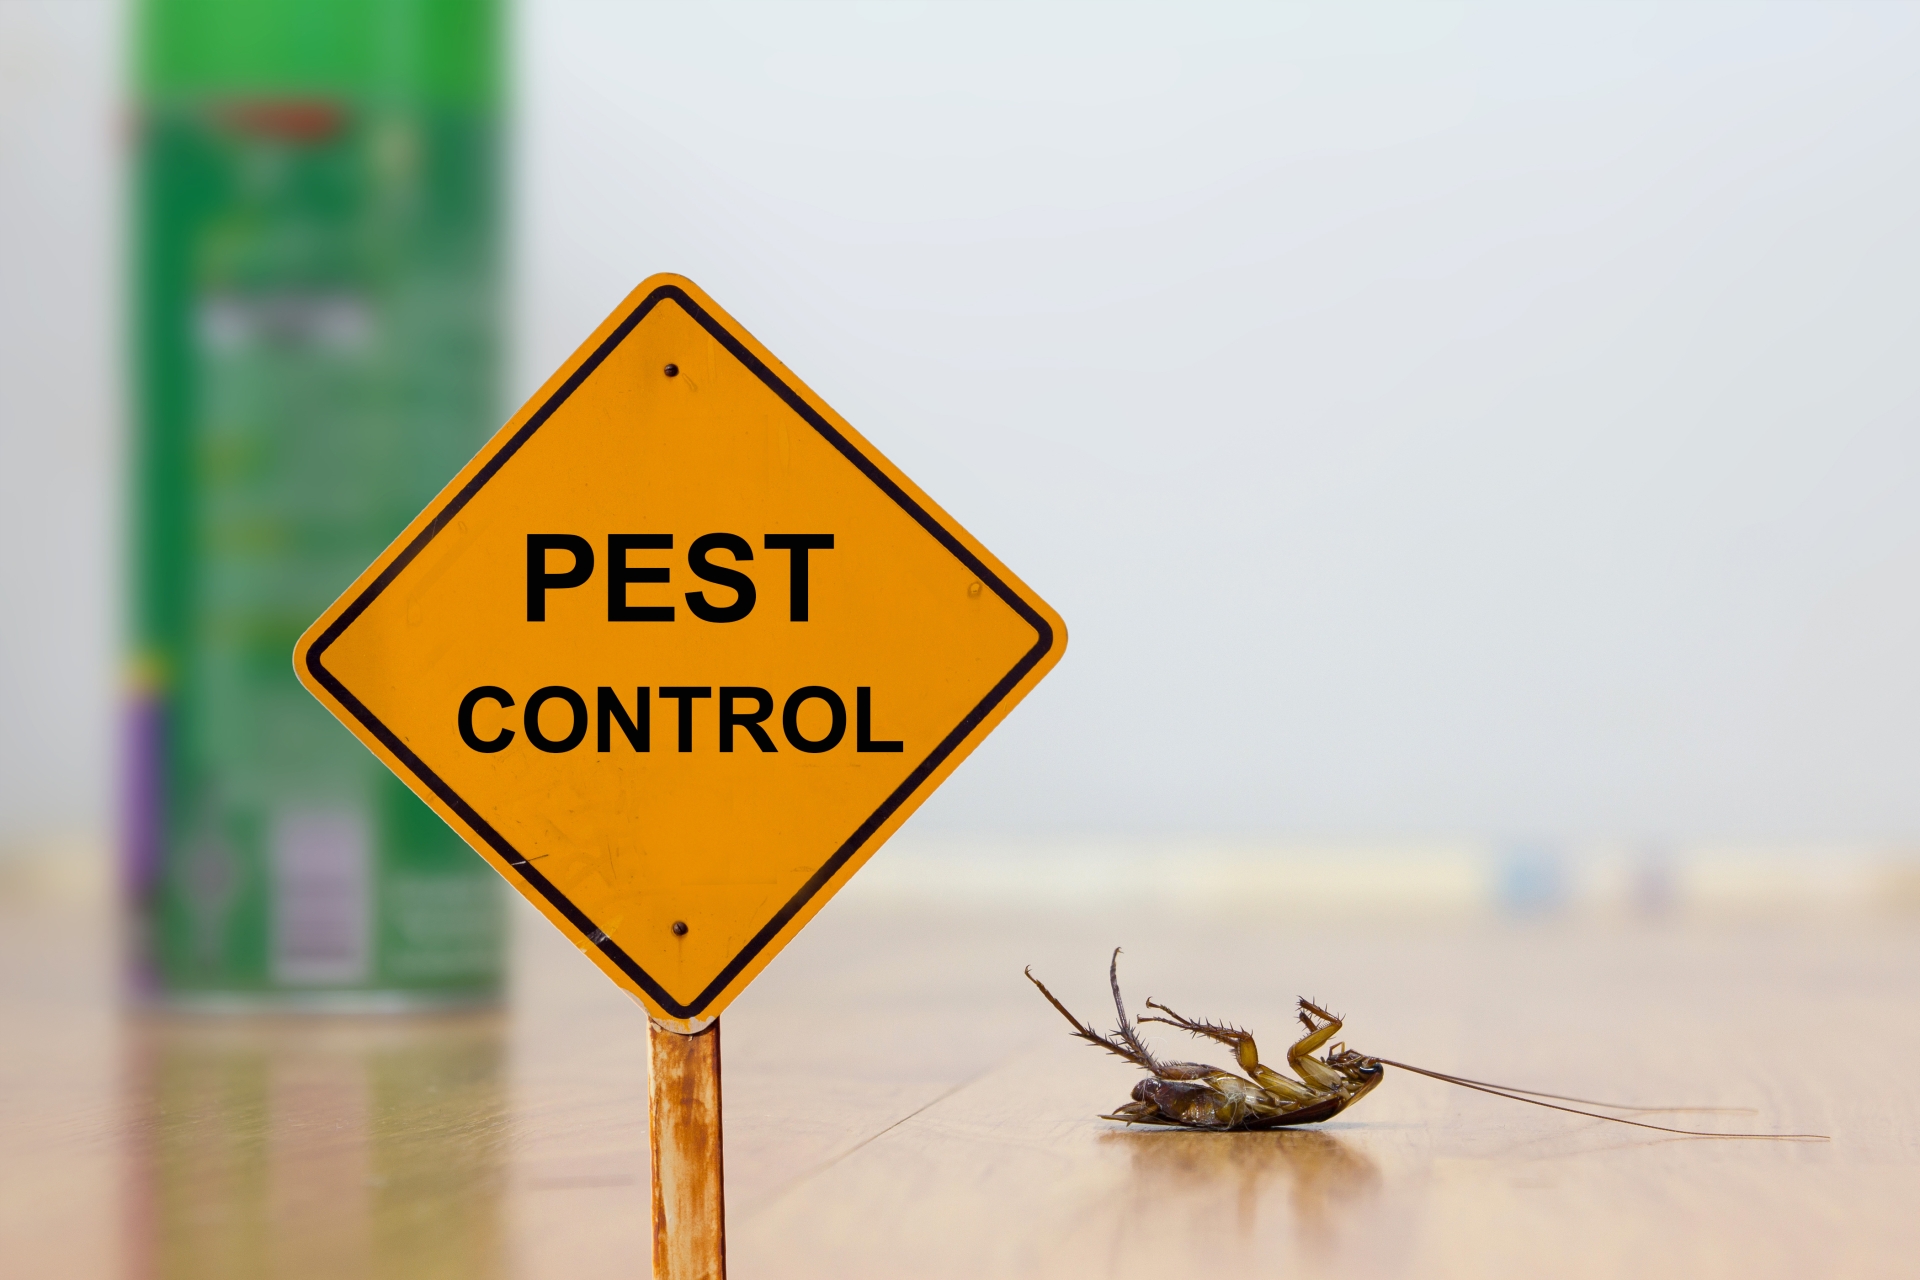 24 Hour Pest Control, Pest Control in London. Call Now 020 3519 0469